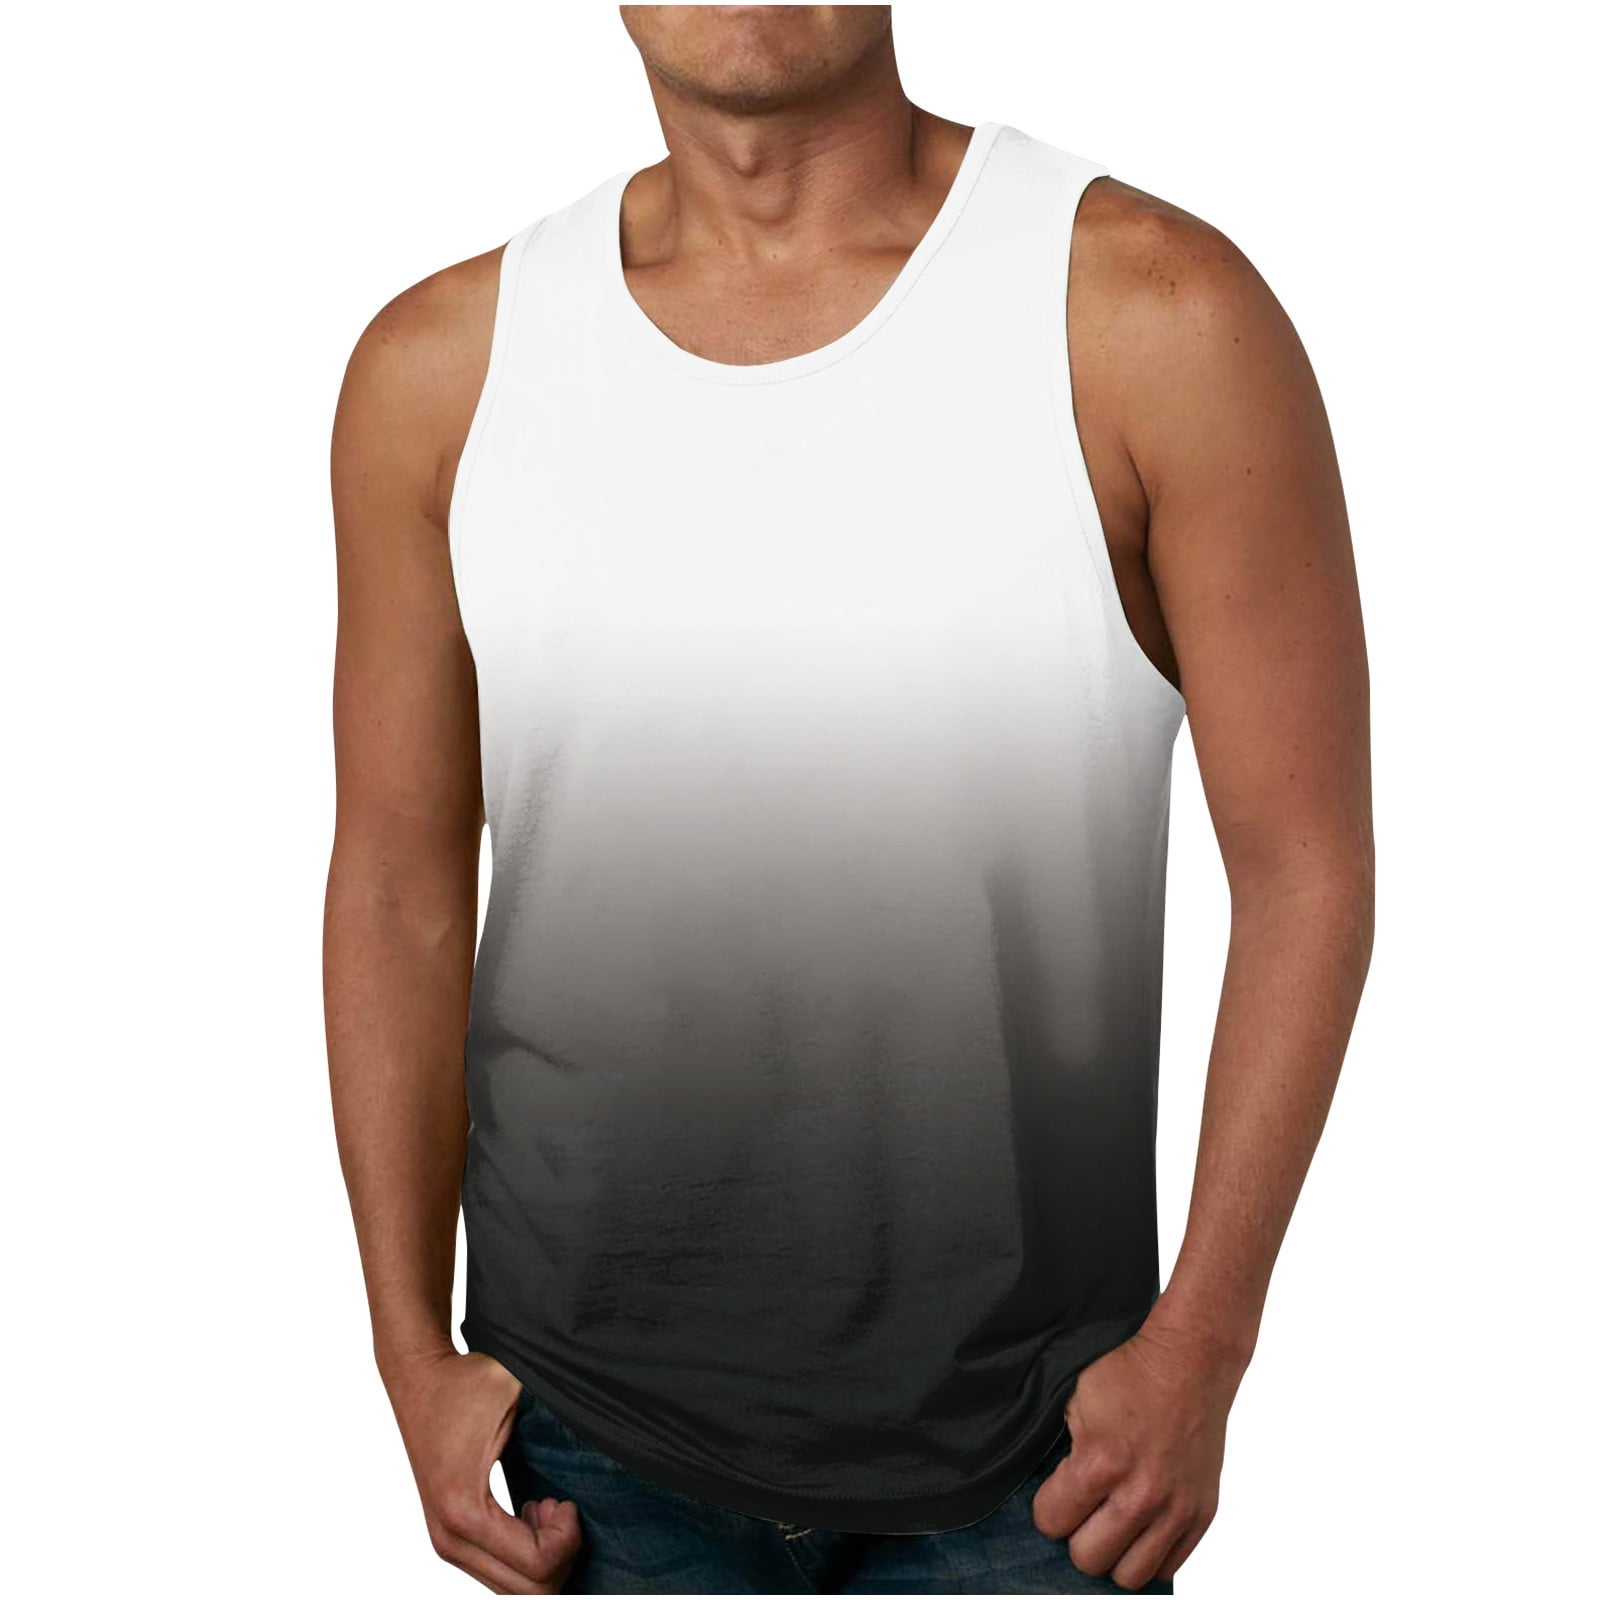 RYRJJ Mens Summer Workout T-Shirts Tops Casual Beach Gradient Printed Round  Neck Sleeveless Breathable Tank Tops(White,XXL) 